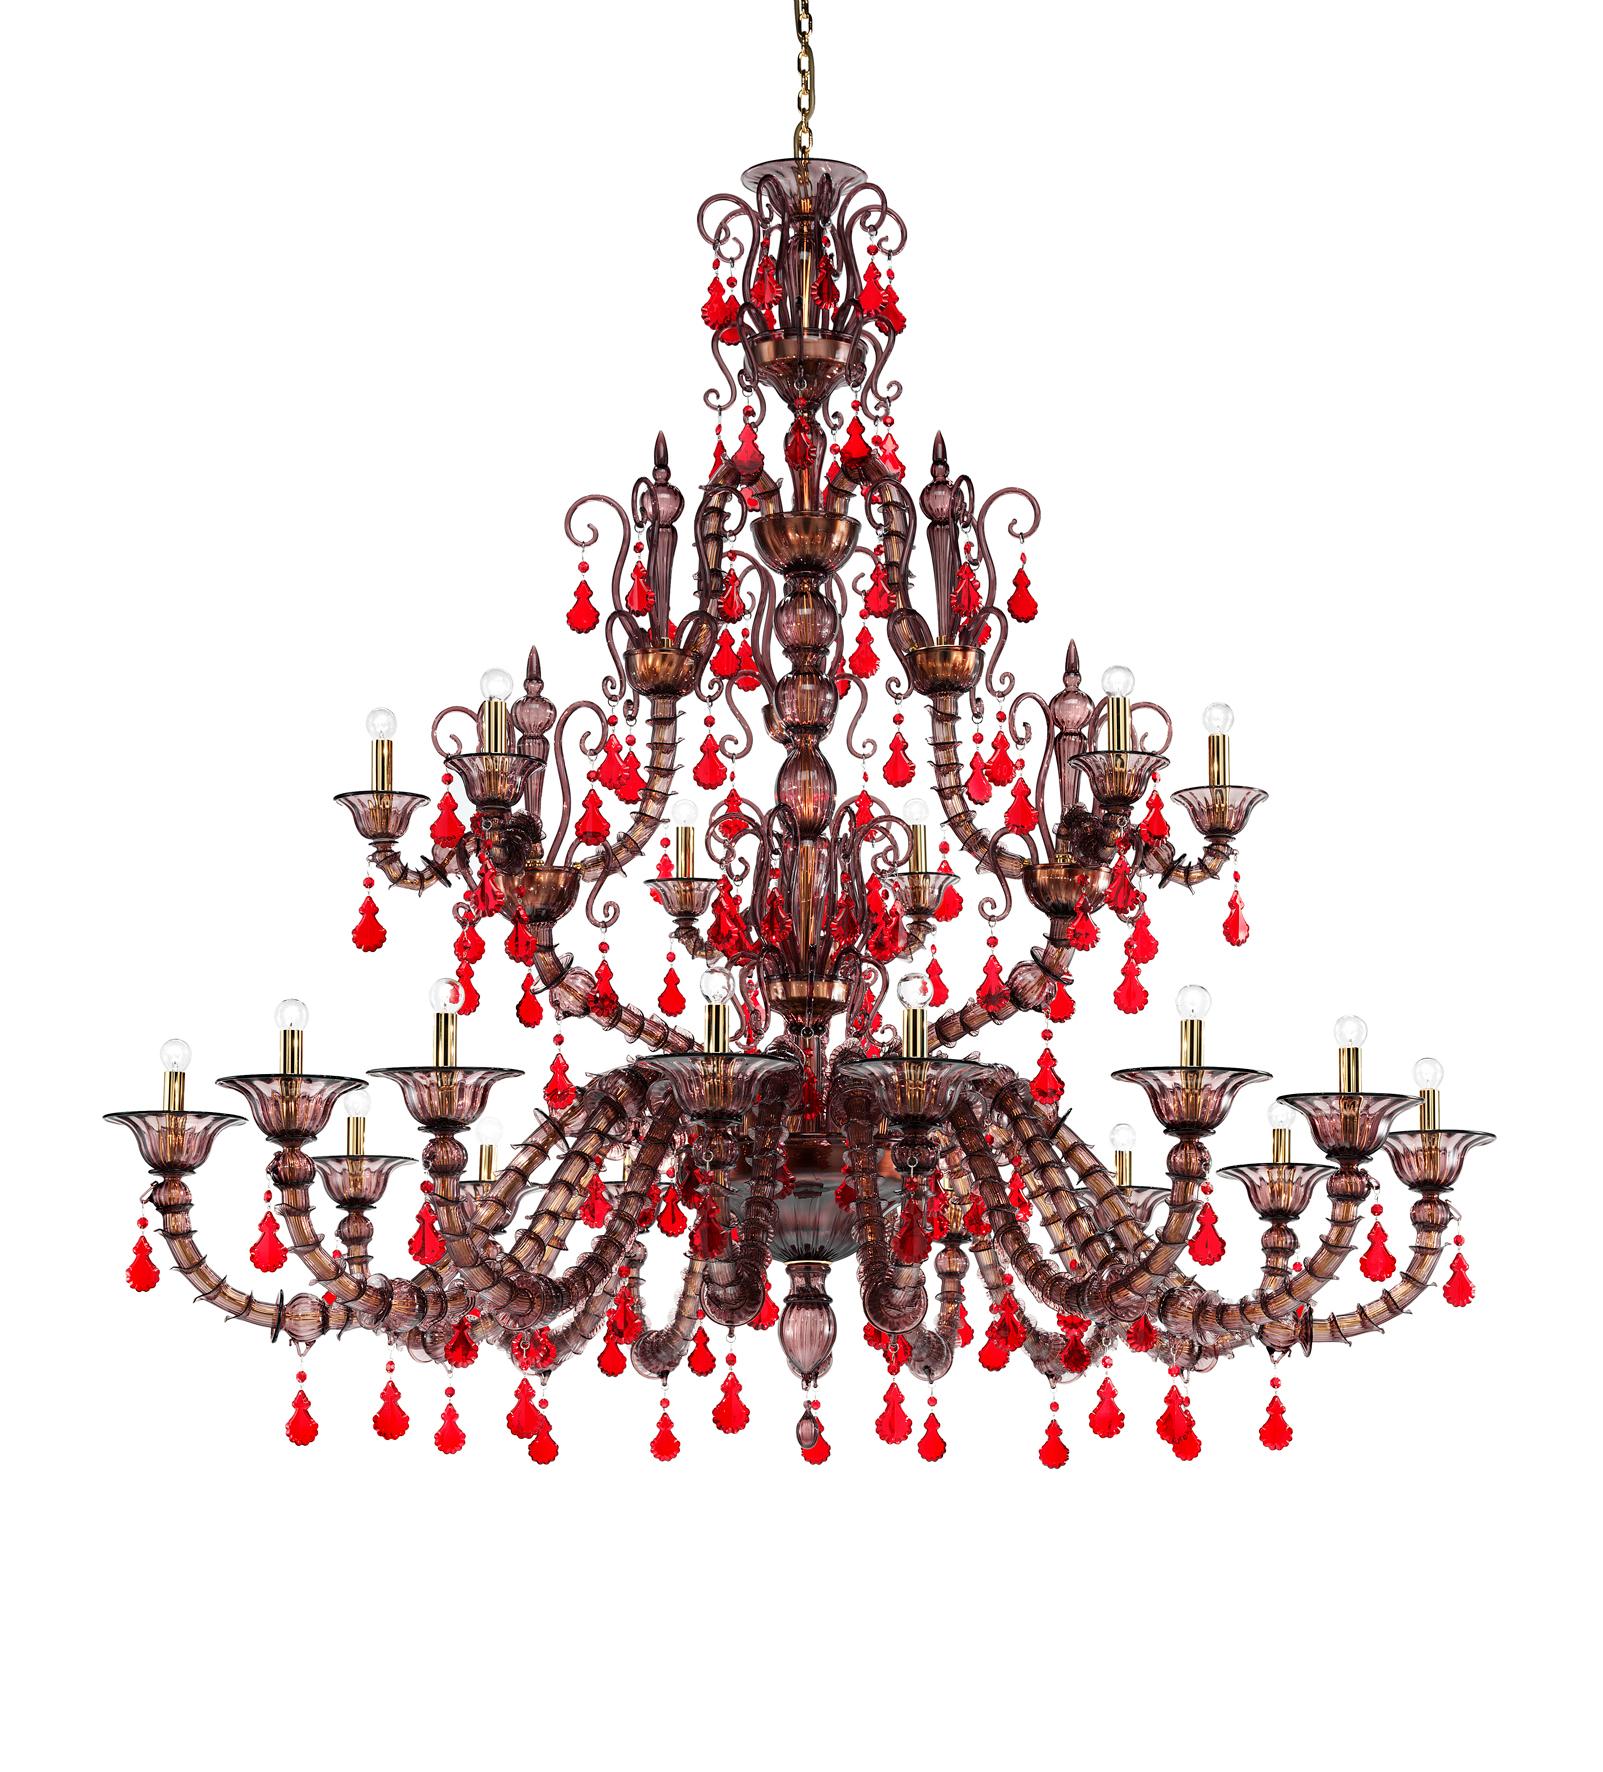 Diamantei four-tier glass chandelier. An elegant and colorful addition particularly suitable for a living room or entrance space. Also available in other colors.

Dimensions: 40 cm diameter x 110 cm height.